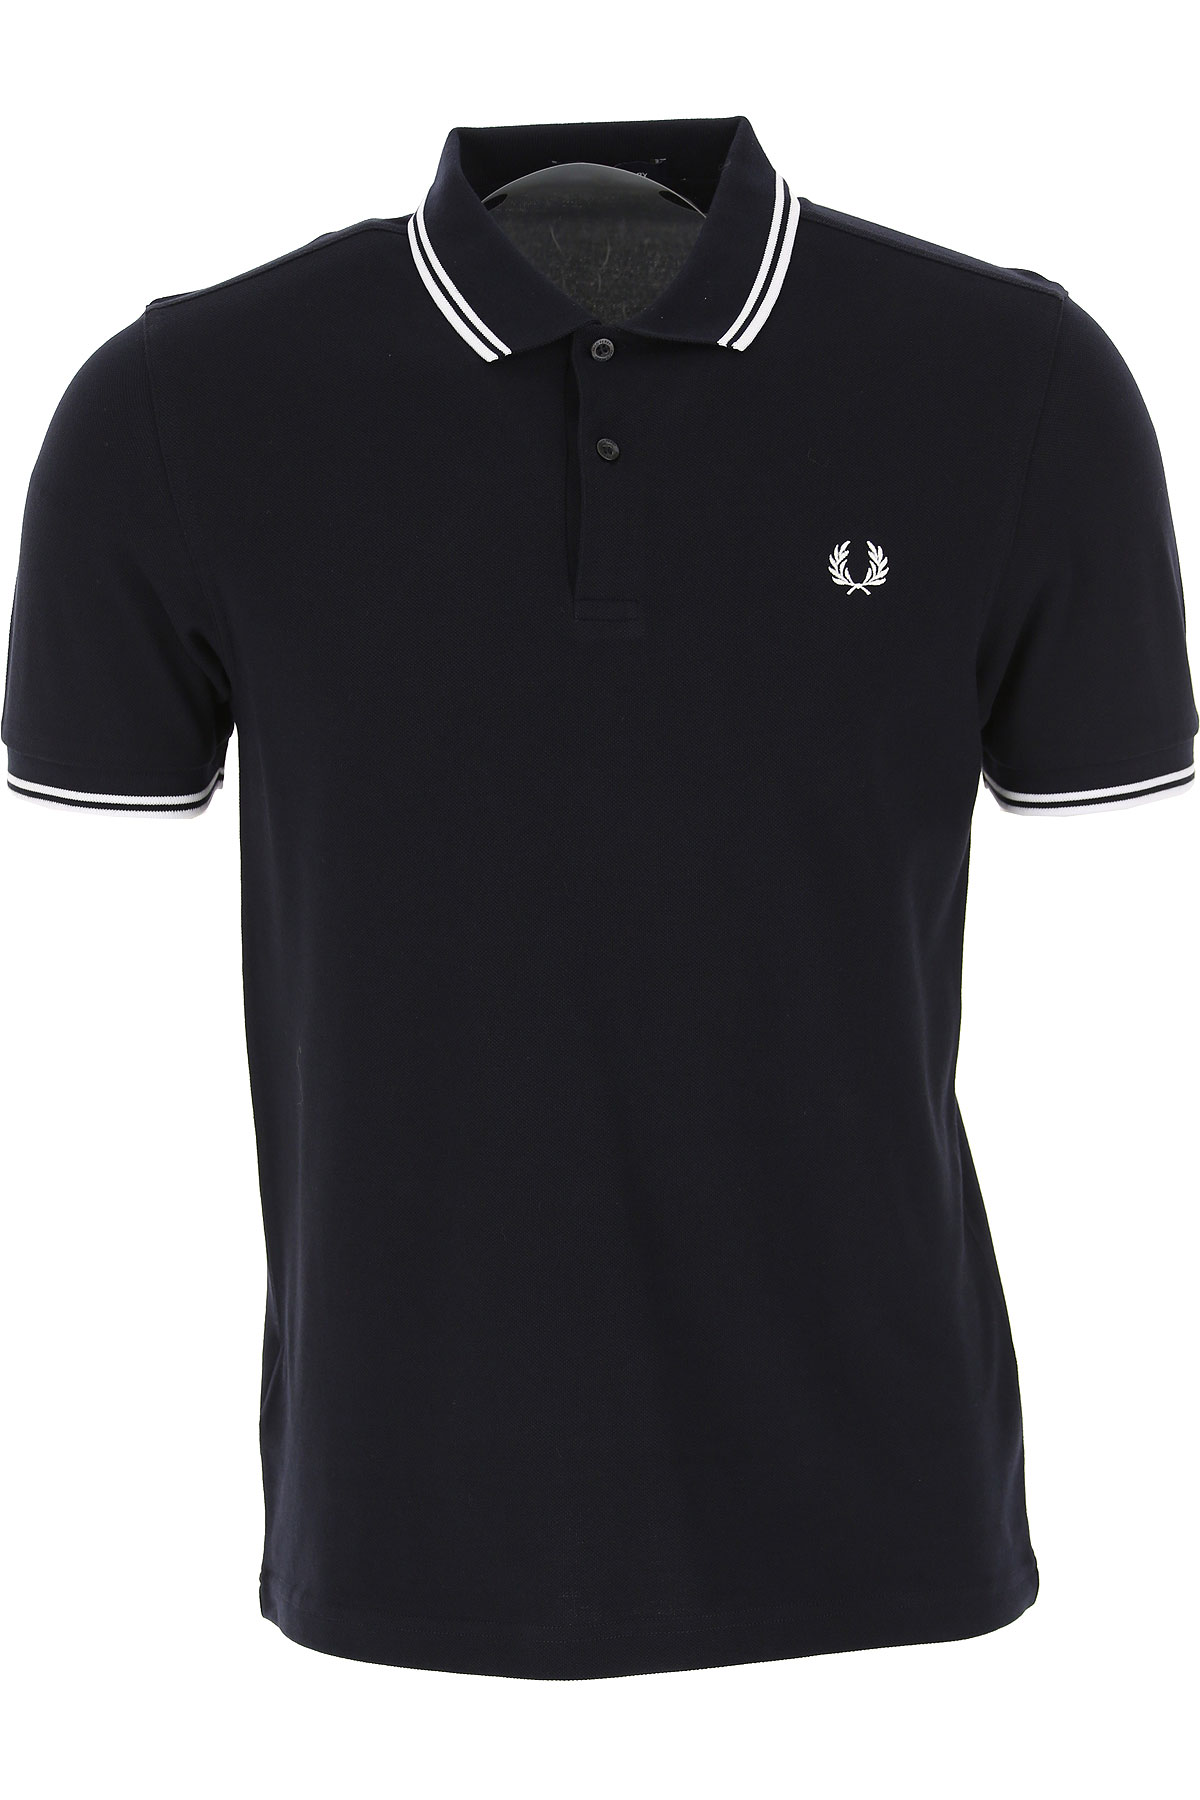 Mens Clothing Fred Perry, Style code: m3600-238-